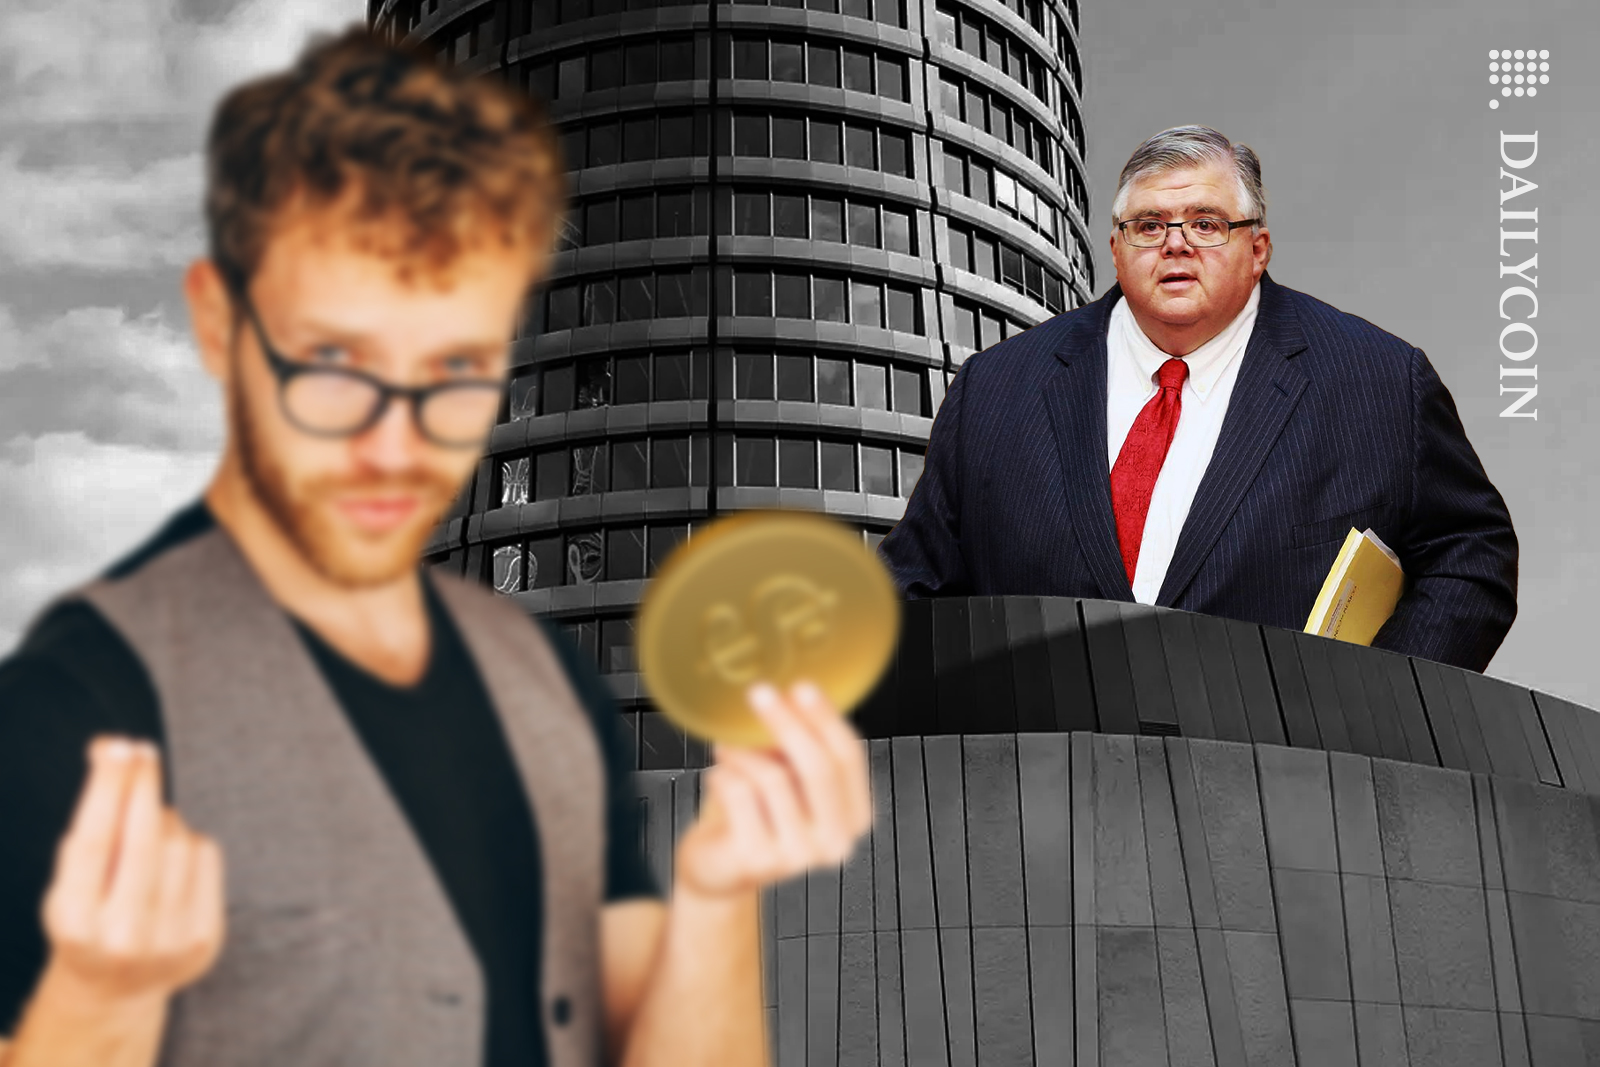 Man showing off his stablecoin outside of BIS bank. Mr Agustín Carstens watching from the building, unimpressed.